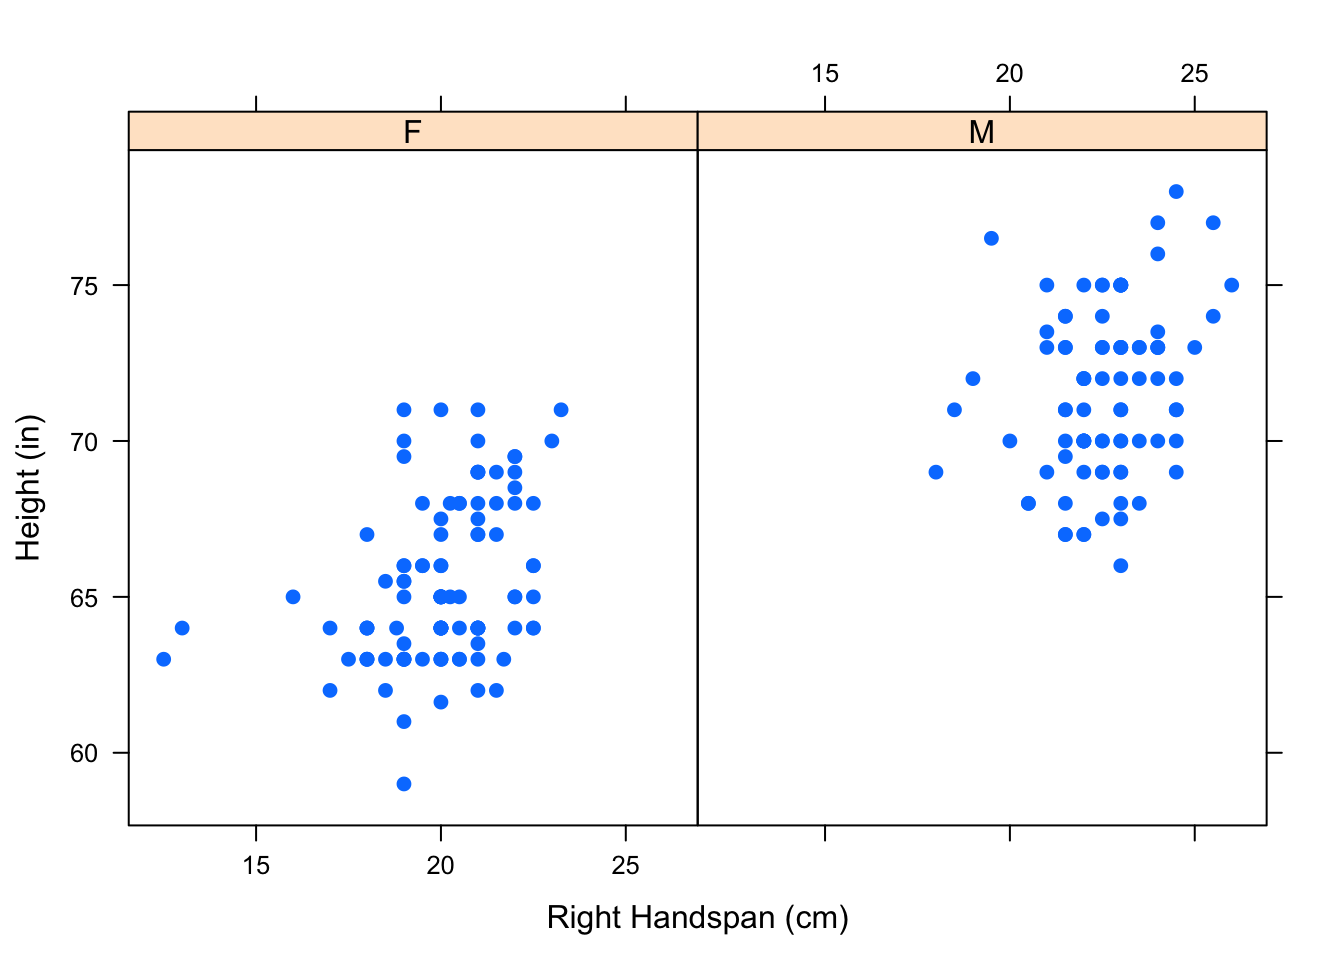 Parallel Hand/Height by Sex:  Scatterplots showing the relationship between one's right handspan and height appear in separate panels.